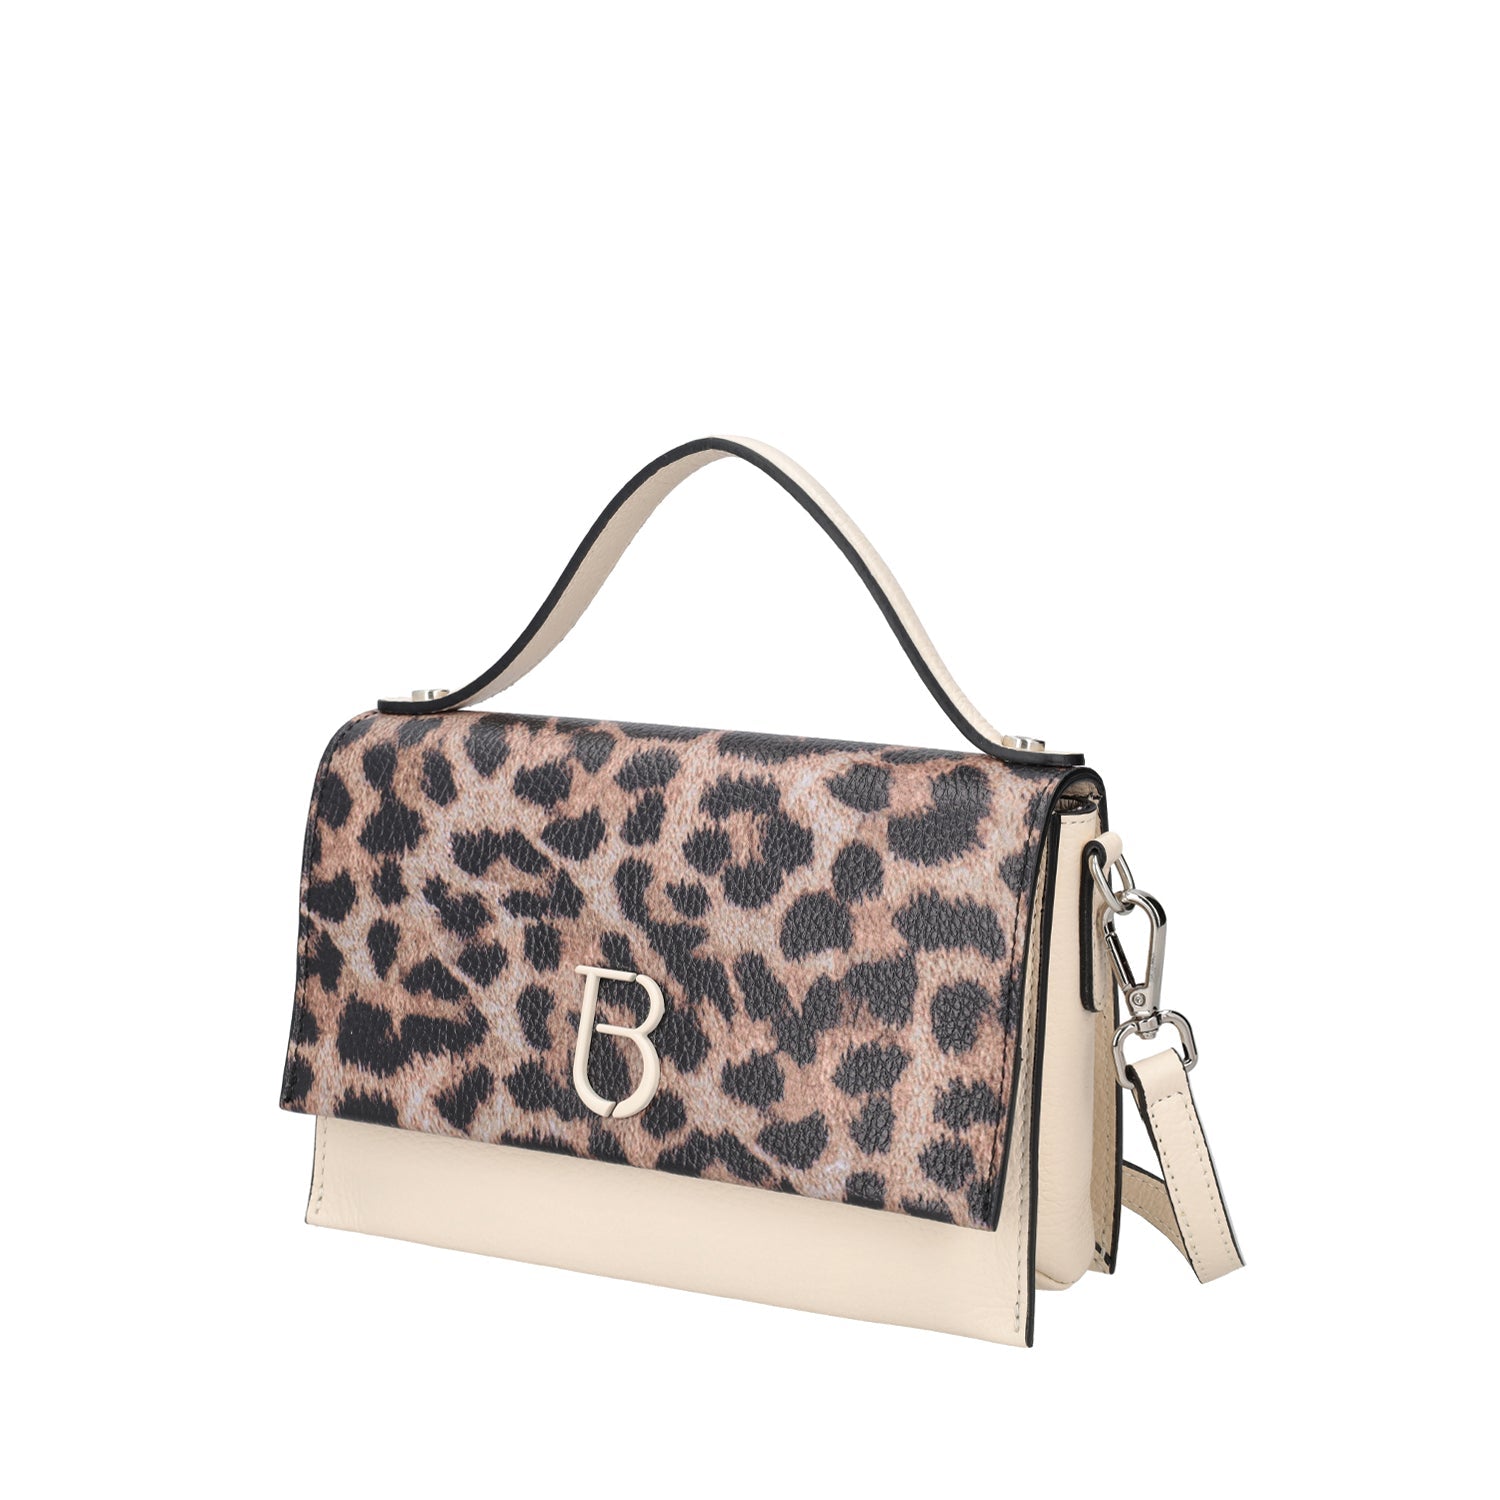 NATURAL NARCISO HAND BAG WITH SPOTTED FLAP